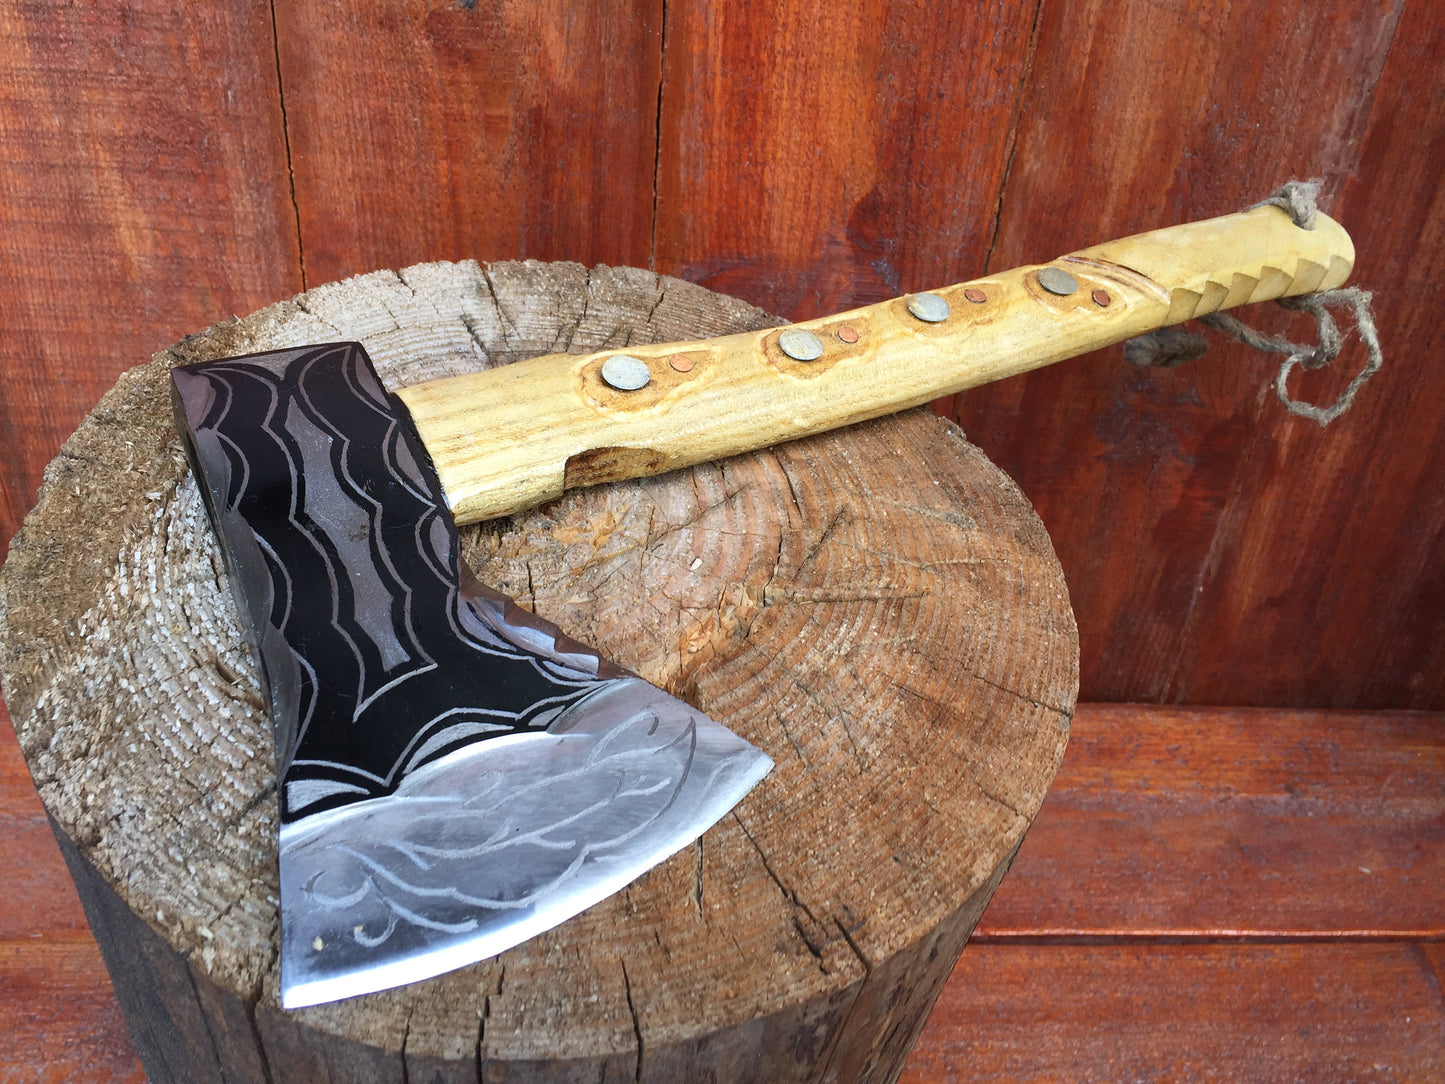 11th anniversary gift for him, steel anniversary gift for him, steel gift for him, tomahawk,handyman tool,viking axe,mens gifts,his birthday